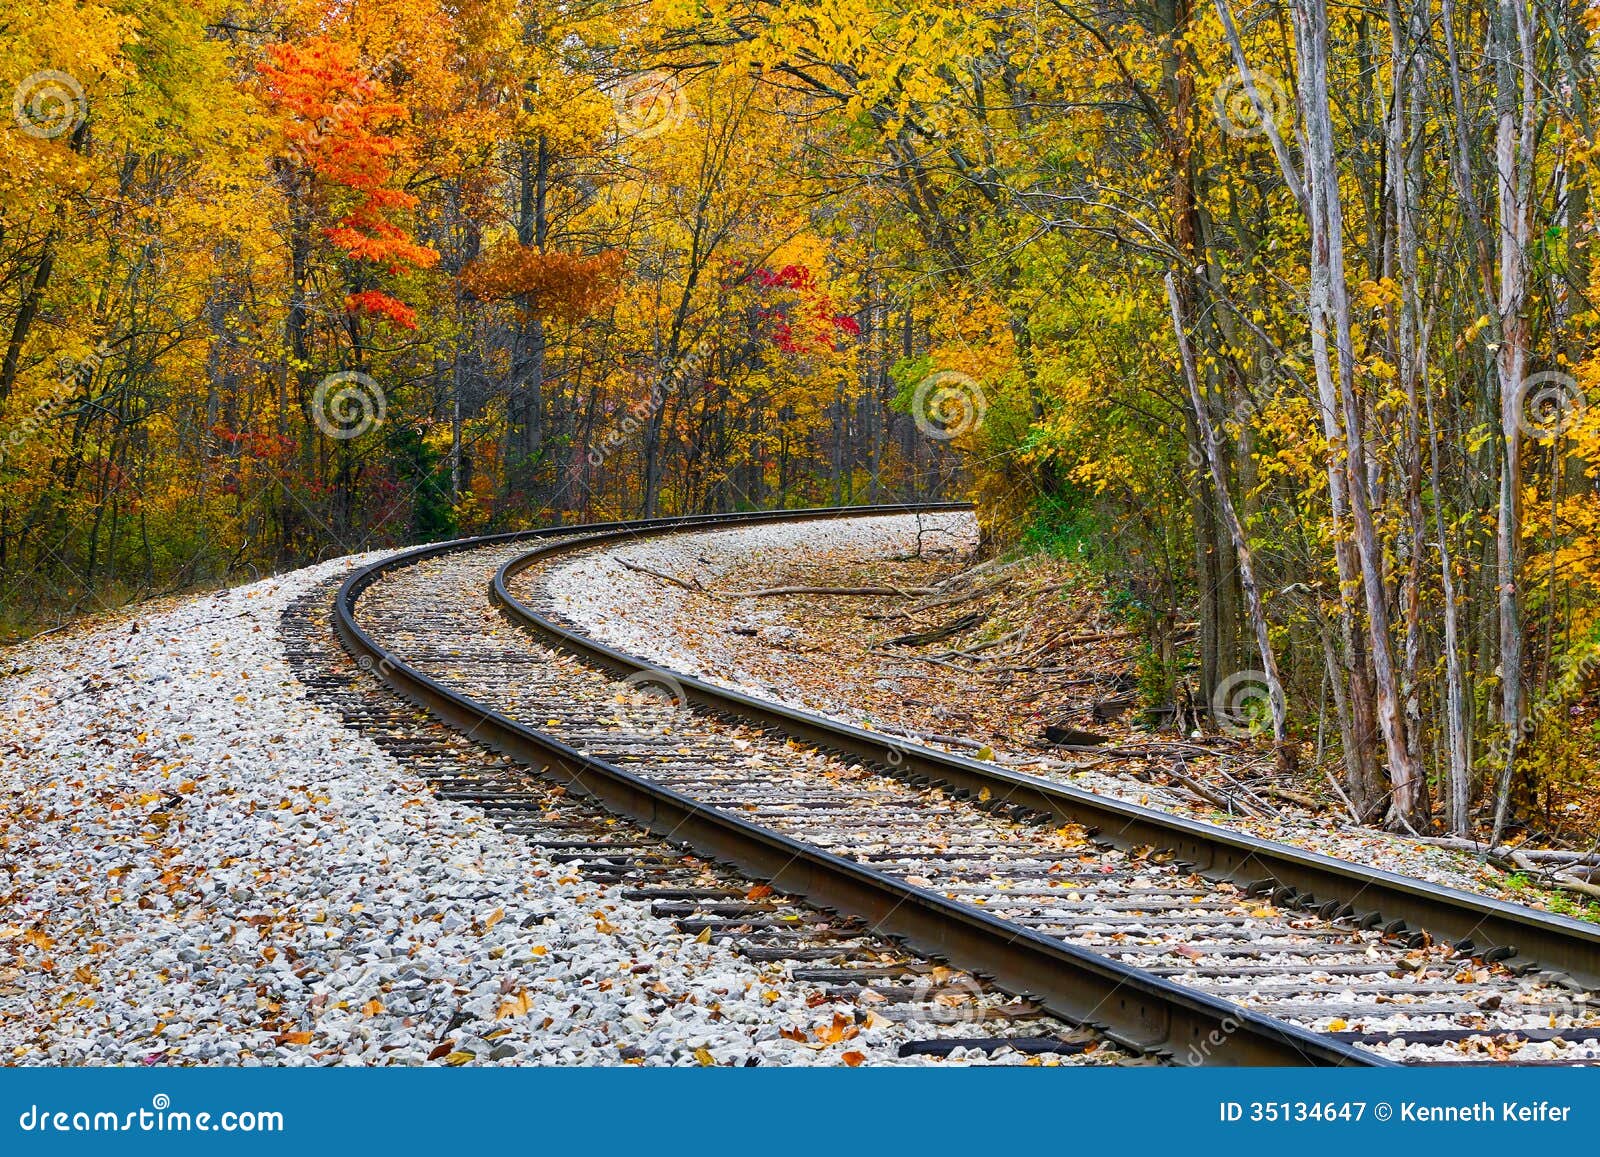 Railroad track curve around the bend and out of sight through trees 